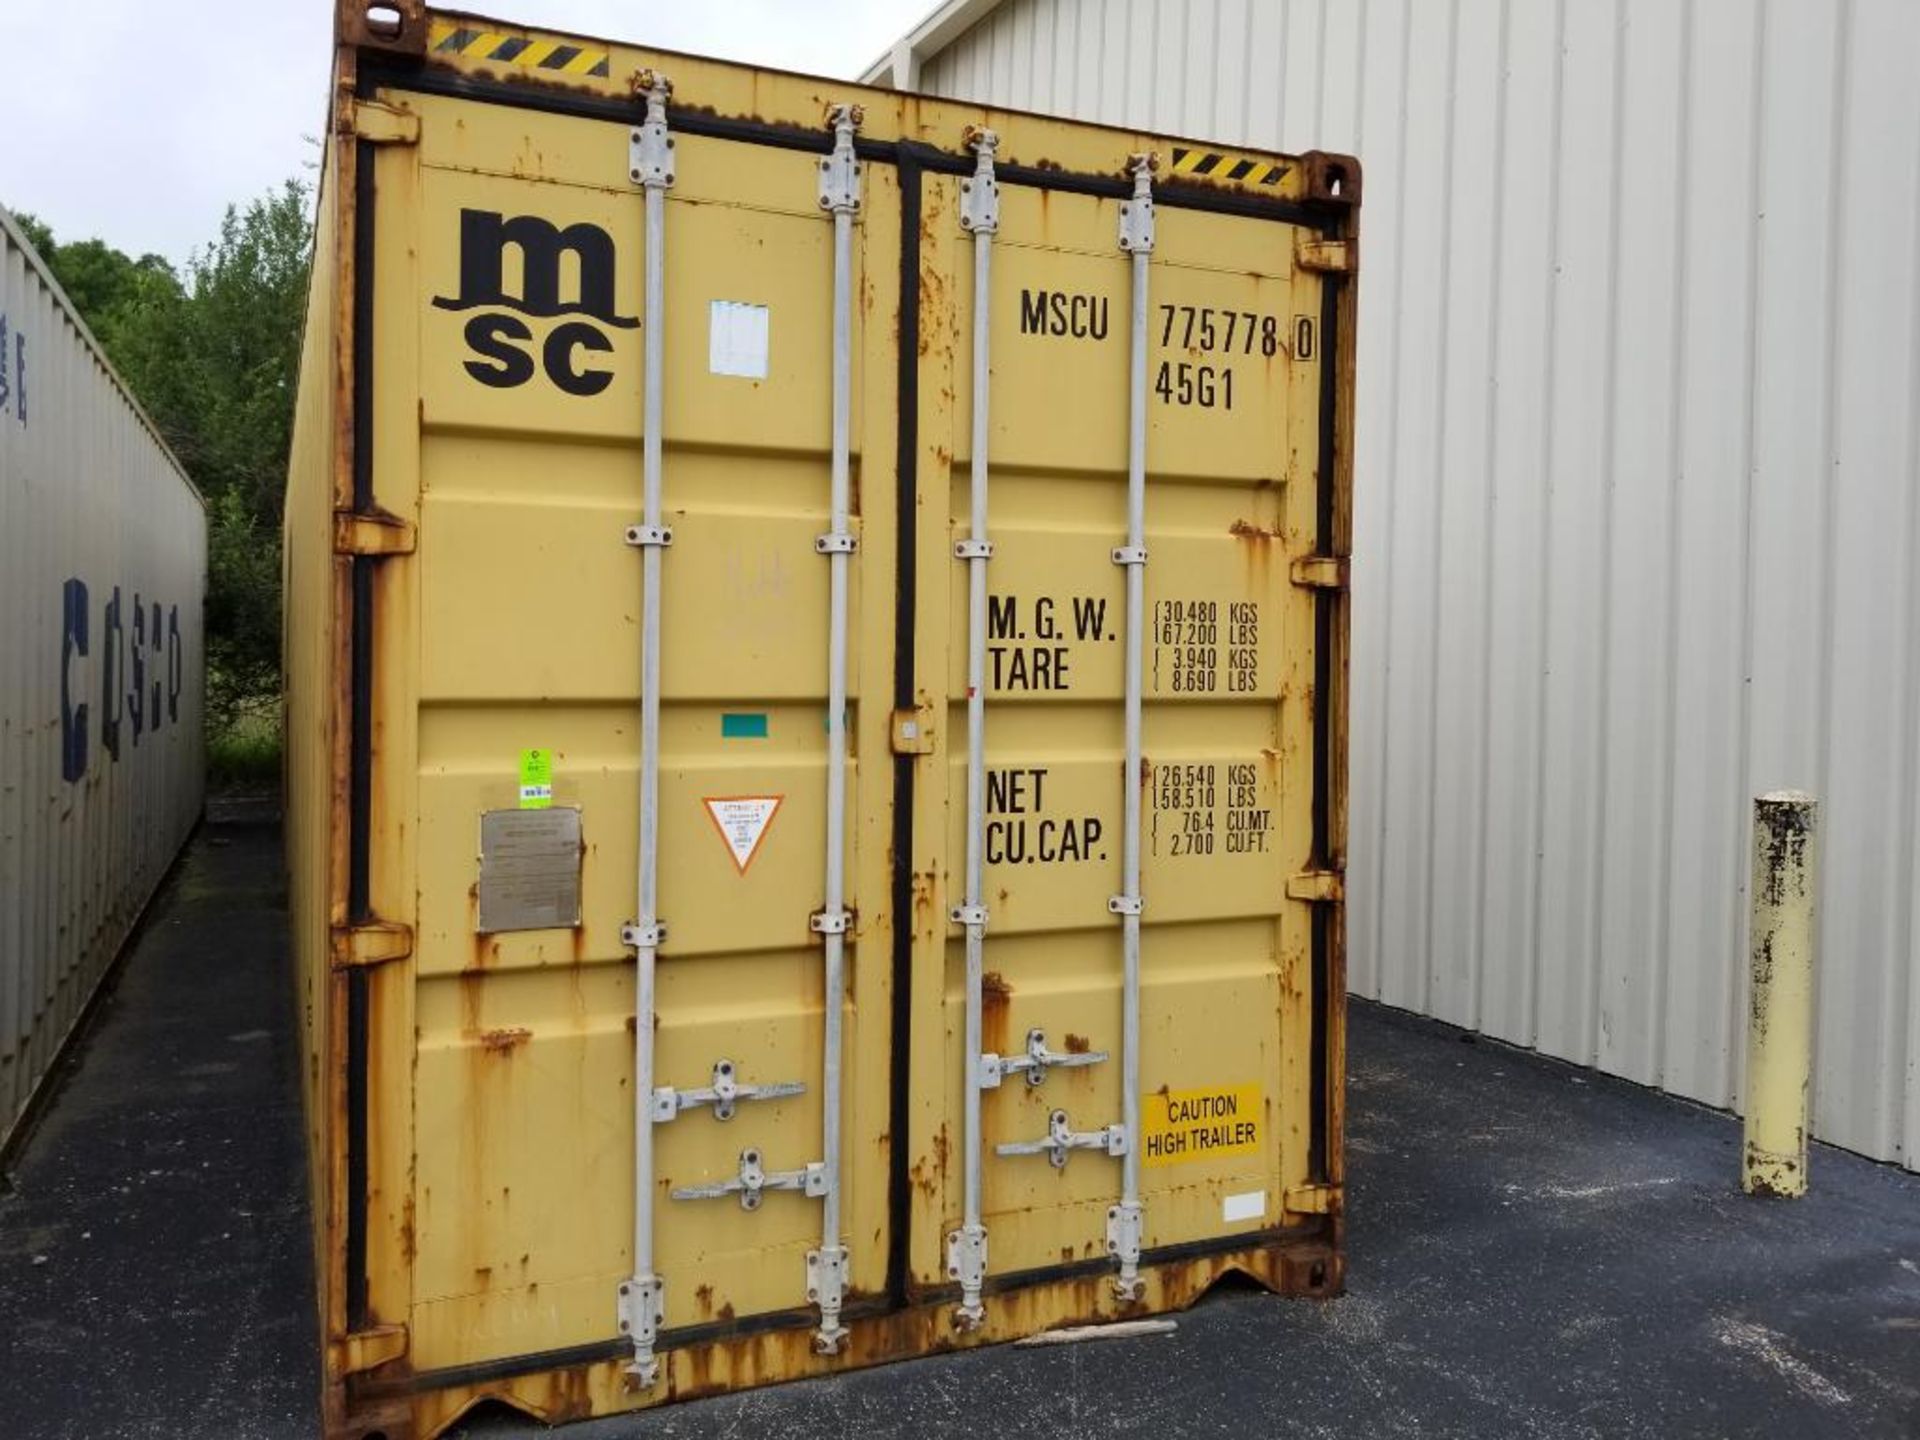 2006 Storage container. 40ft length. 9ft 6in tall. Type NL40H-181A. Max gross weight 67,200lbs. - Image 7 of 9